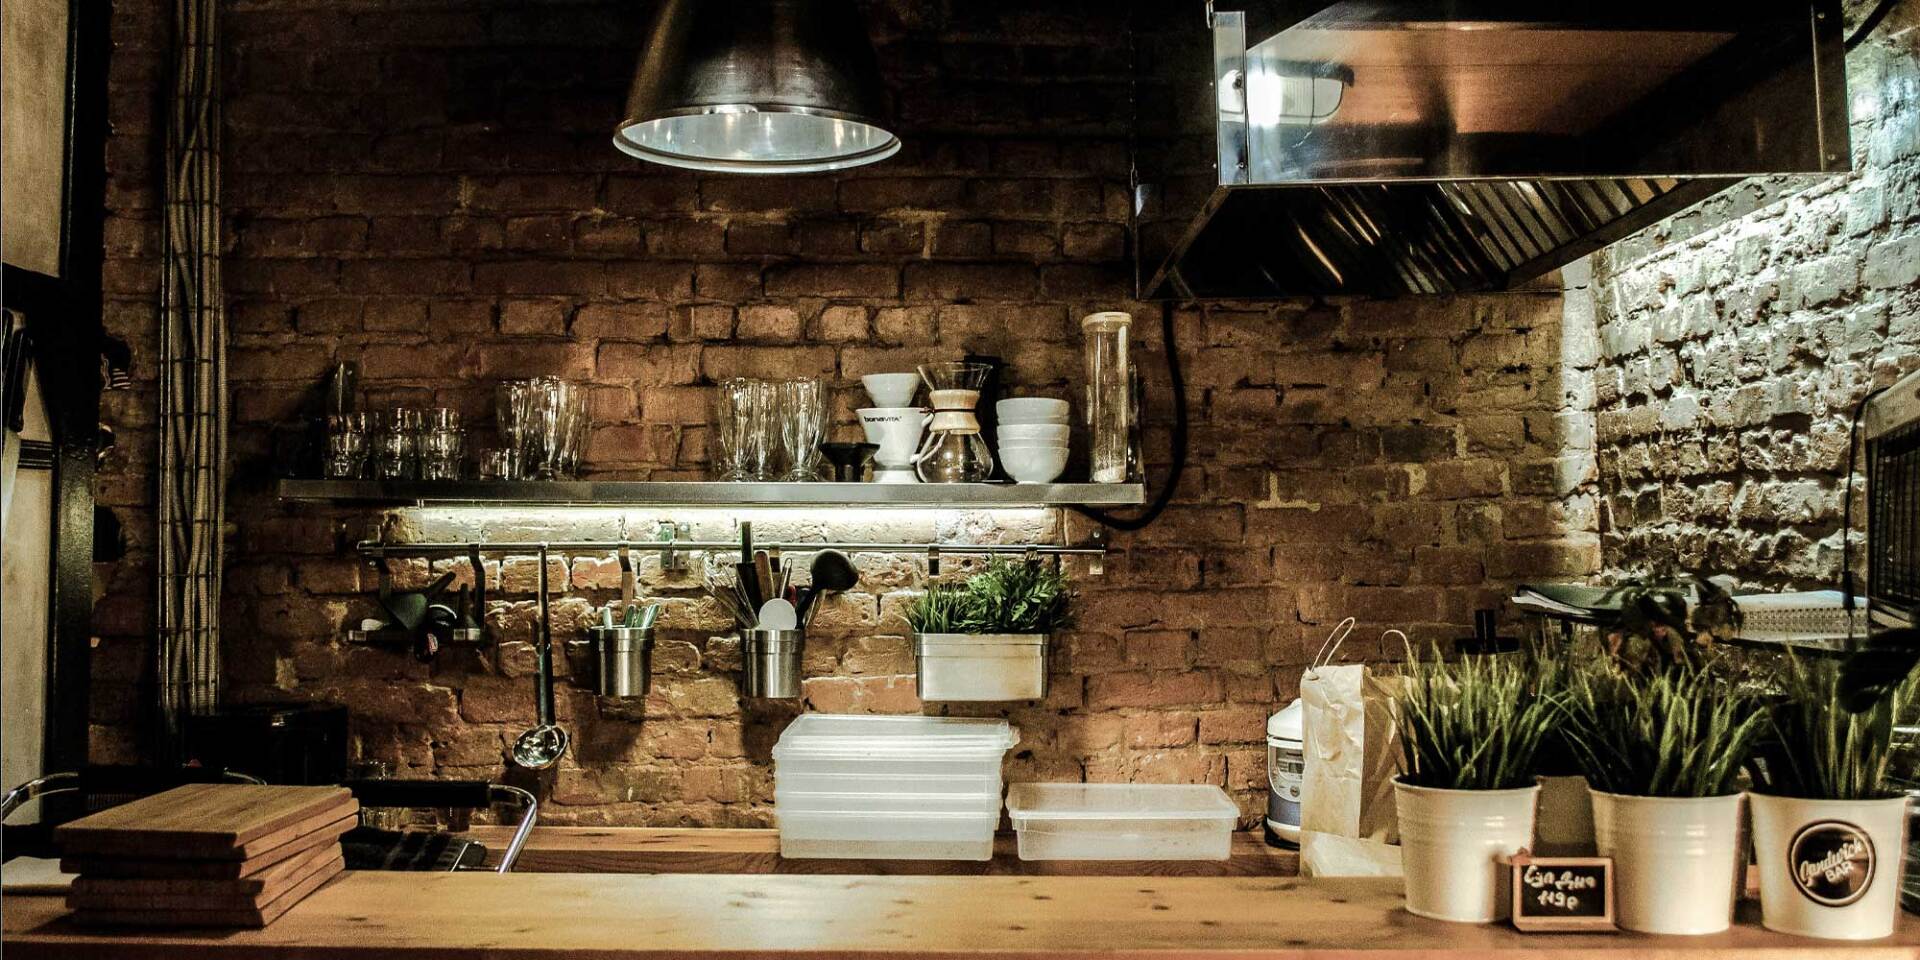 This recycled brick wall serves as a great backsplash for this rustic kitchen.